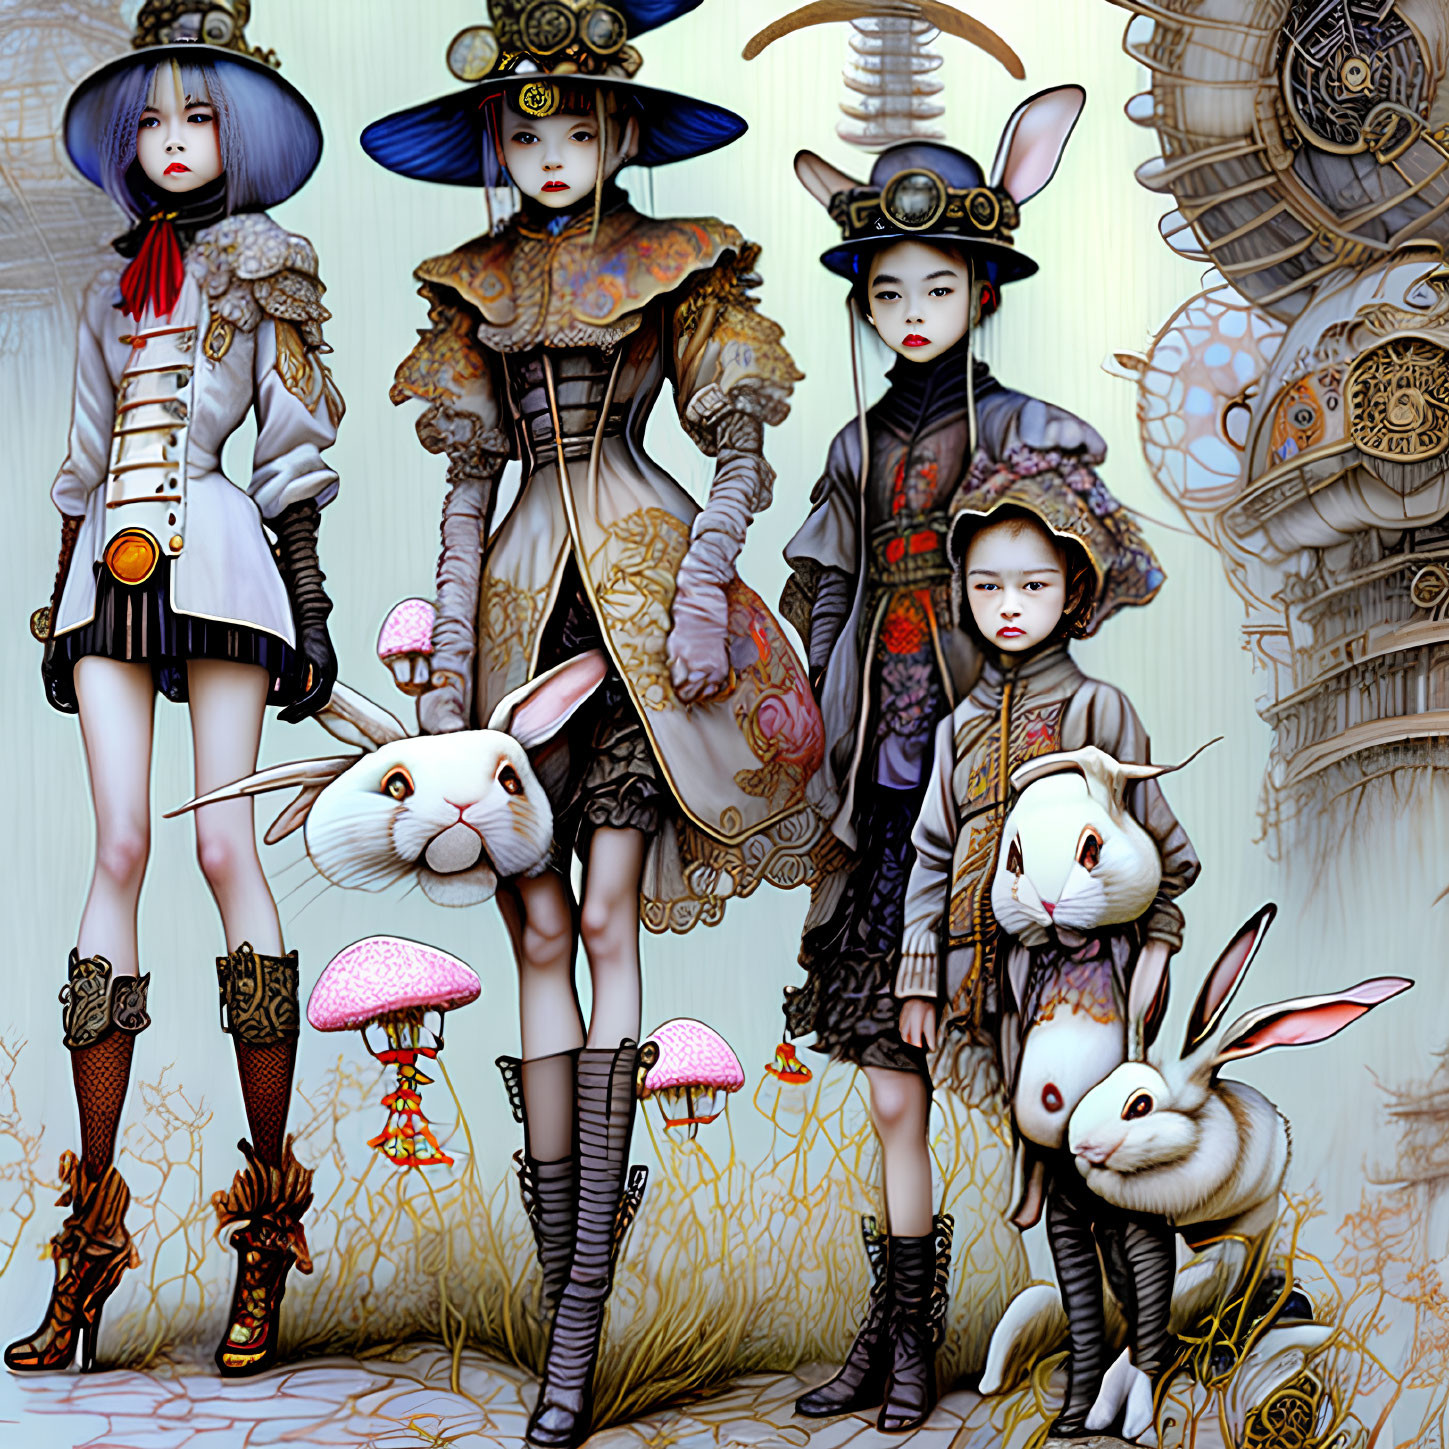 Fantasy characters with rabbit features in ornate clothing among cogwheels and large rabbits in hats